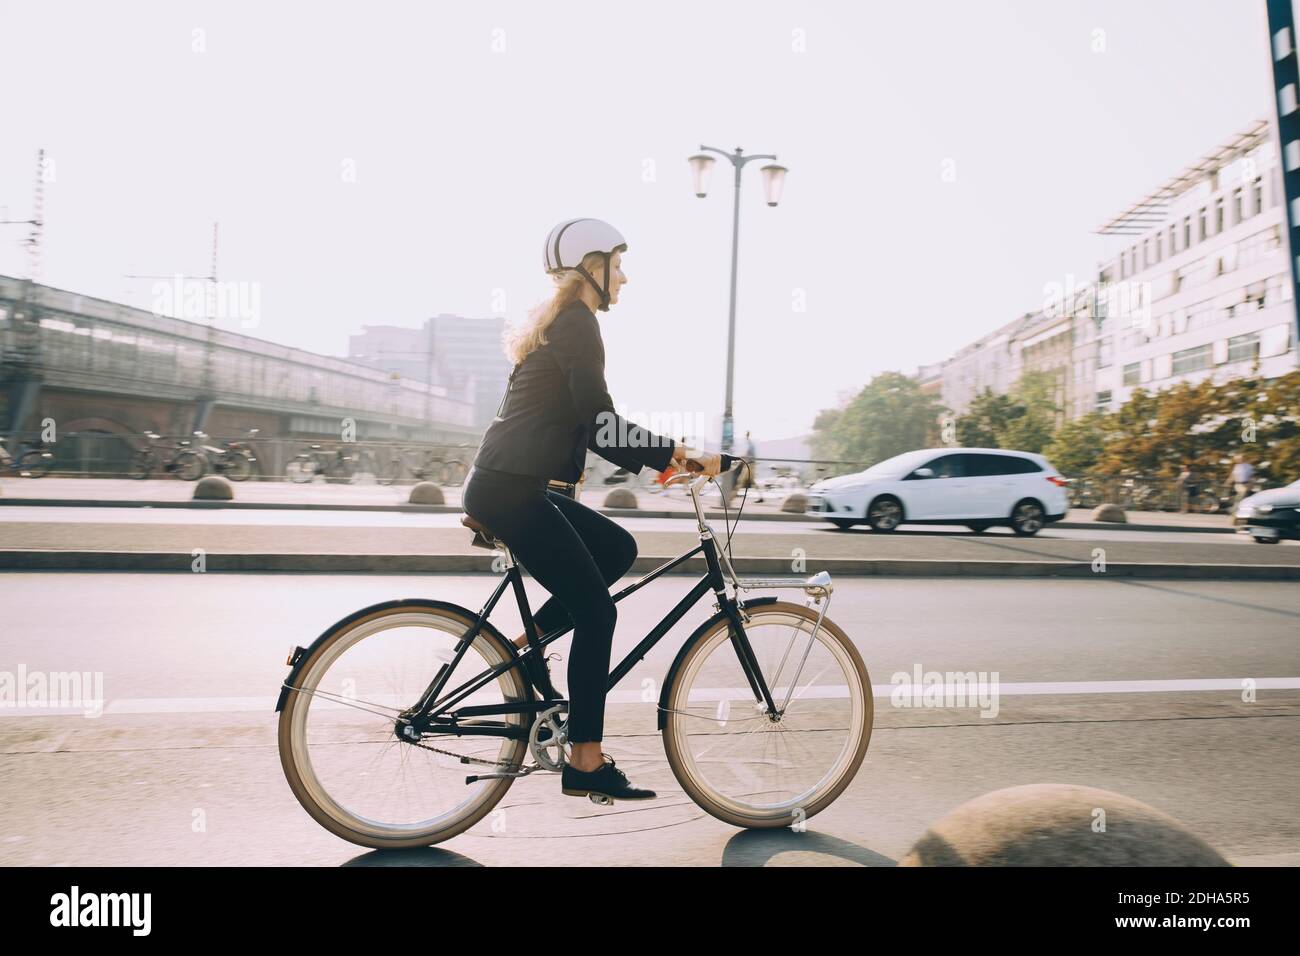 Full length of female executive wearing helmet riding bicycle on road in city Stock Photo